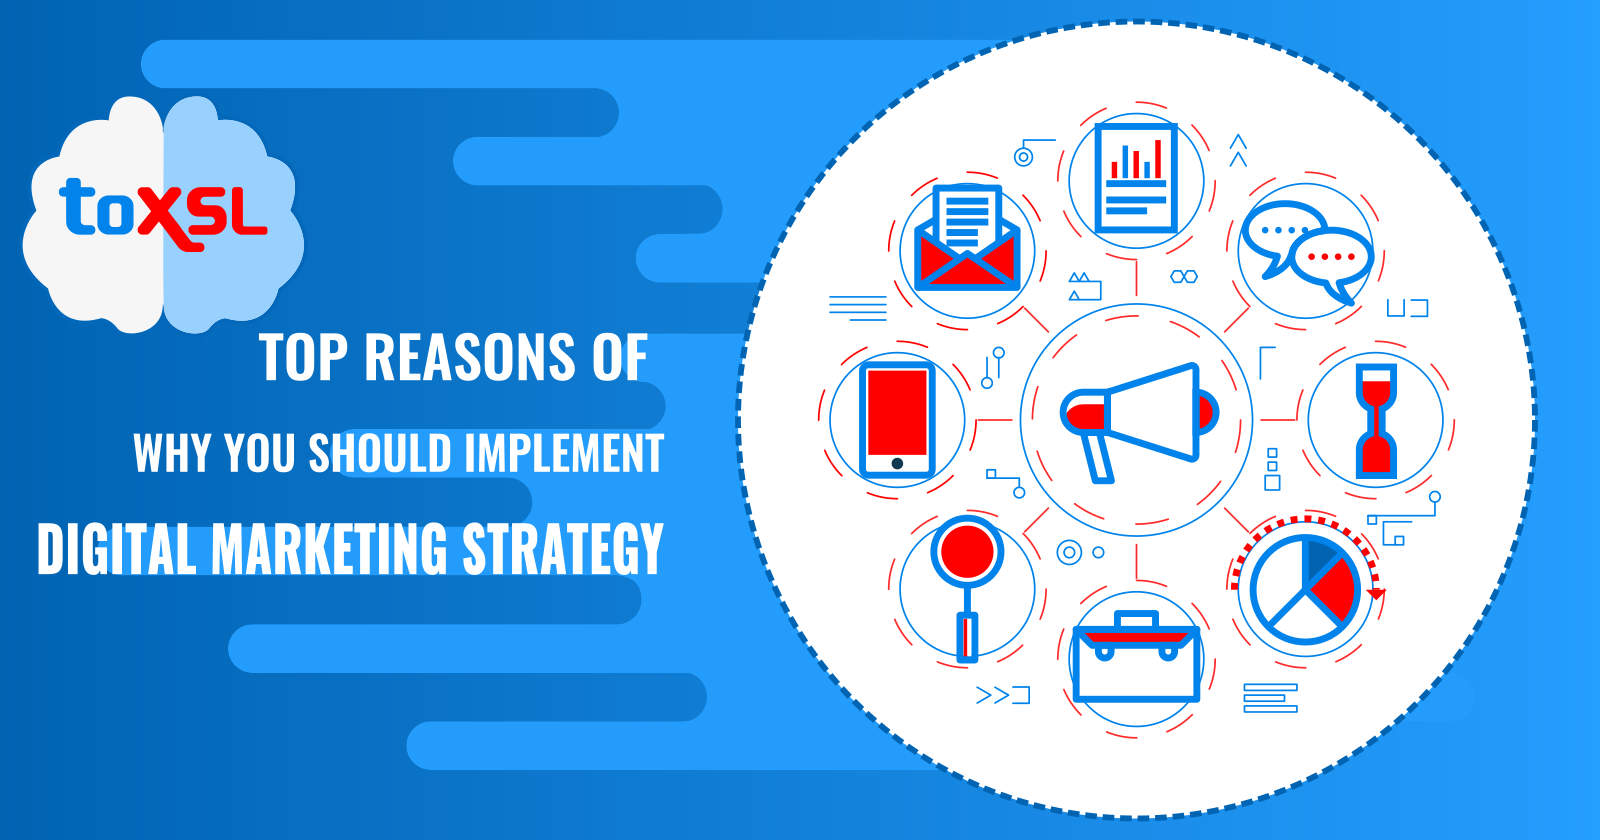 Top Reasons of Why You Should Implement Digital Marketing Strategy